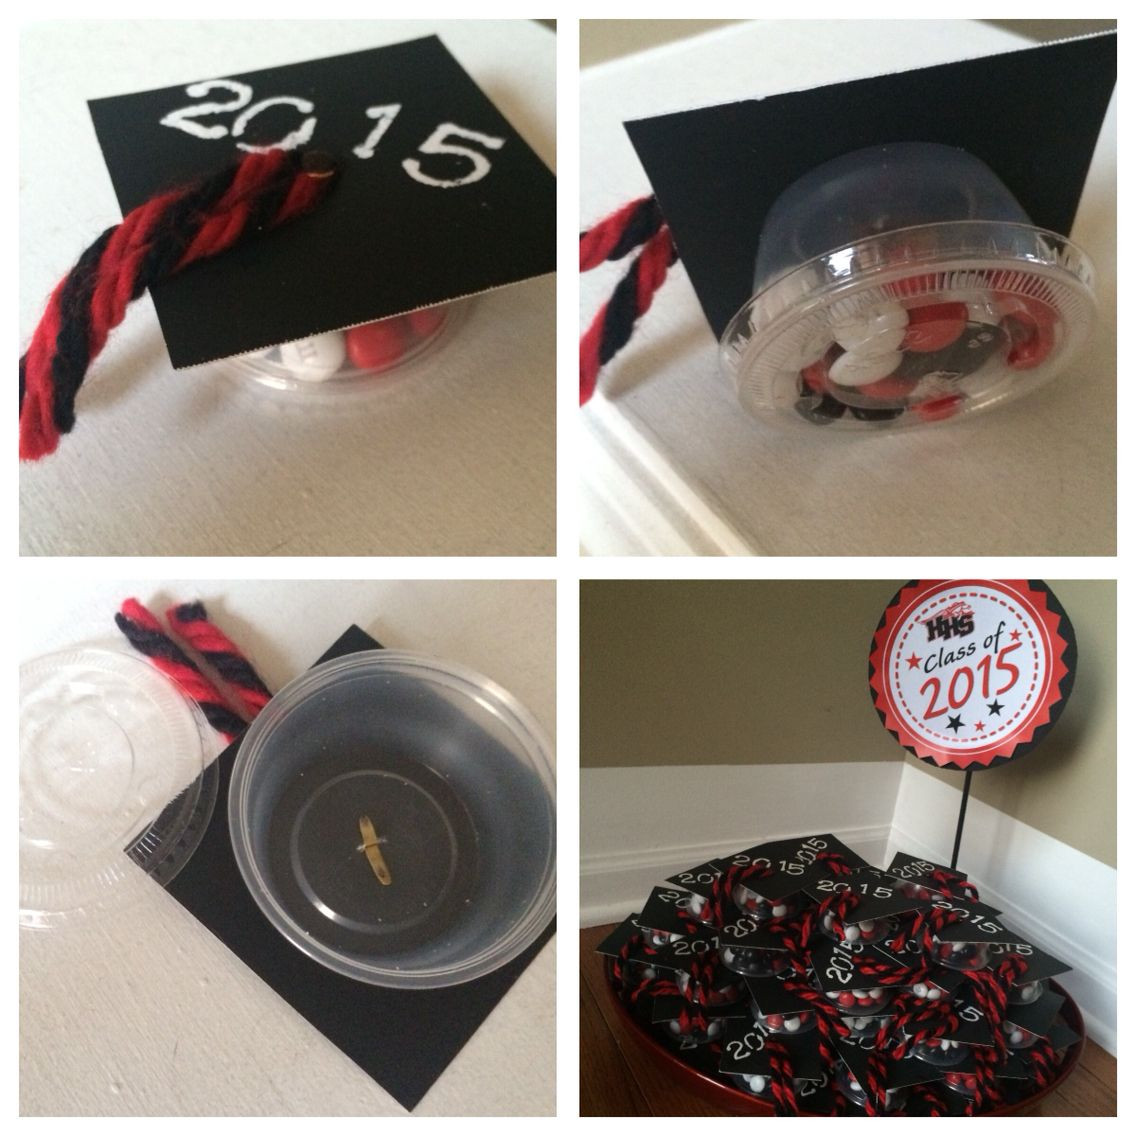 Homemade Graduation Party Favor Ideas
 Graduation Party Favors I made these using 3"x3" black